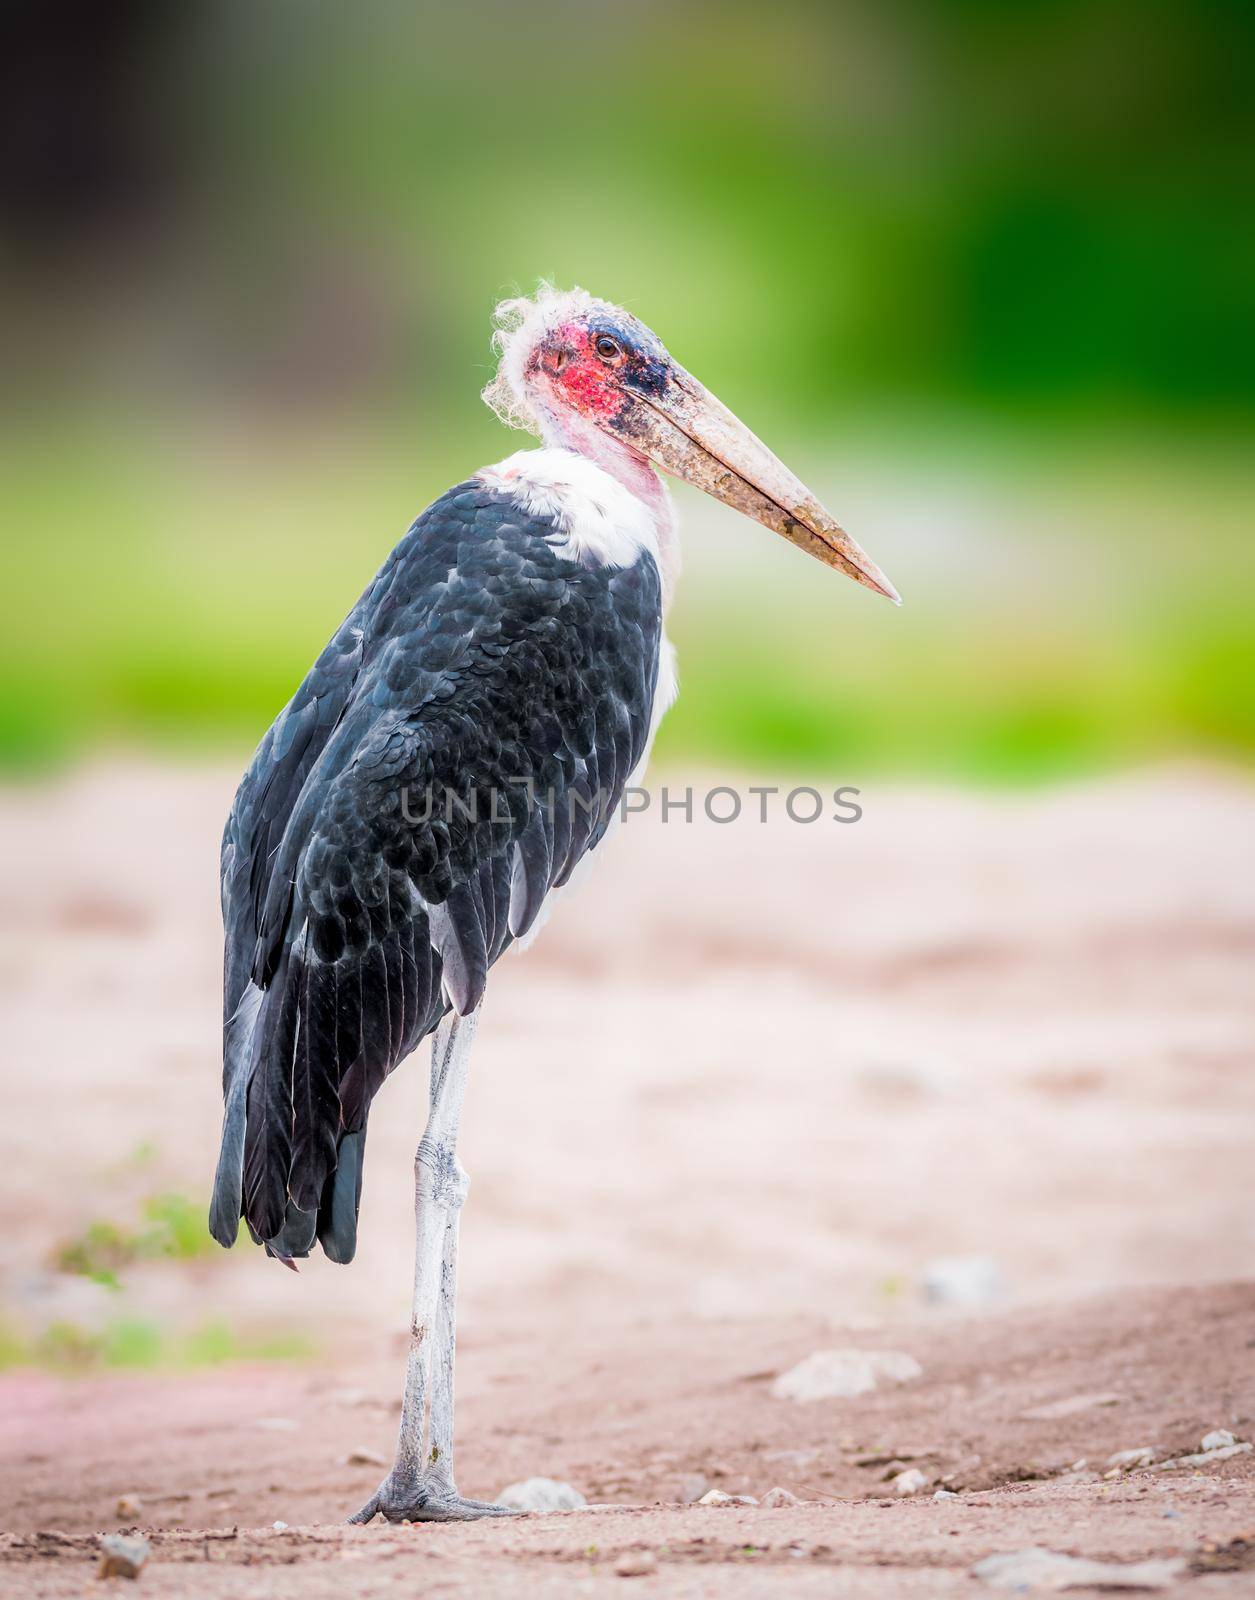 Marabou Stork s a large wading bird in the stork family Ciconiidae